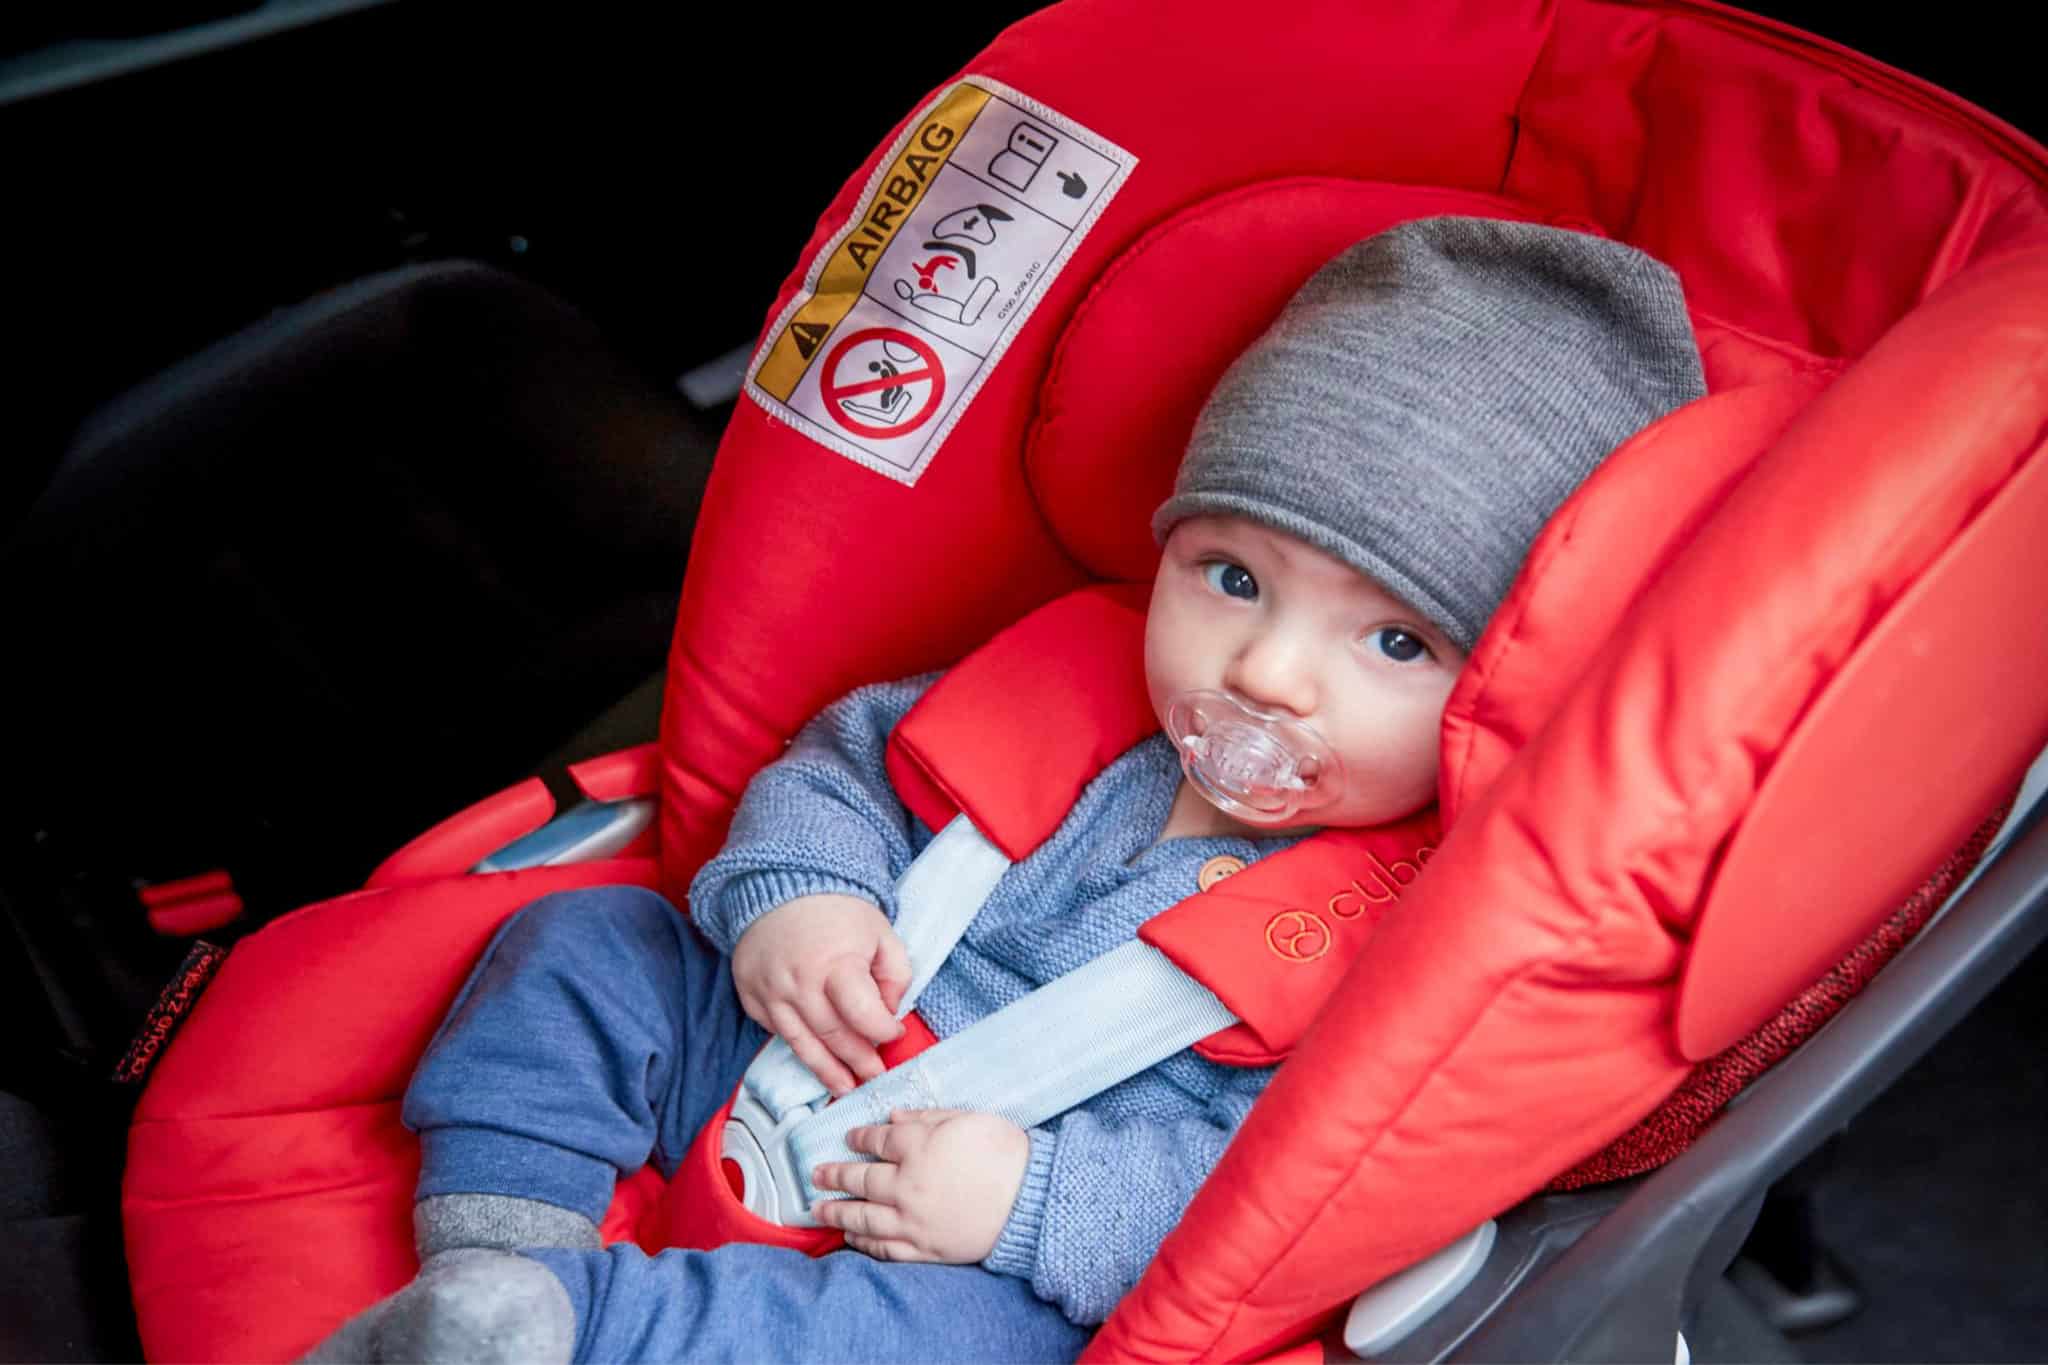 Can't Live Without' Parenting Product: Cybex Cloud Z i-Size car seat -  Absolutely Mama UK